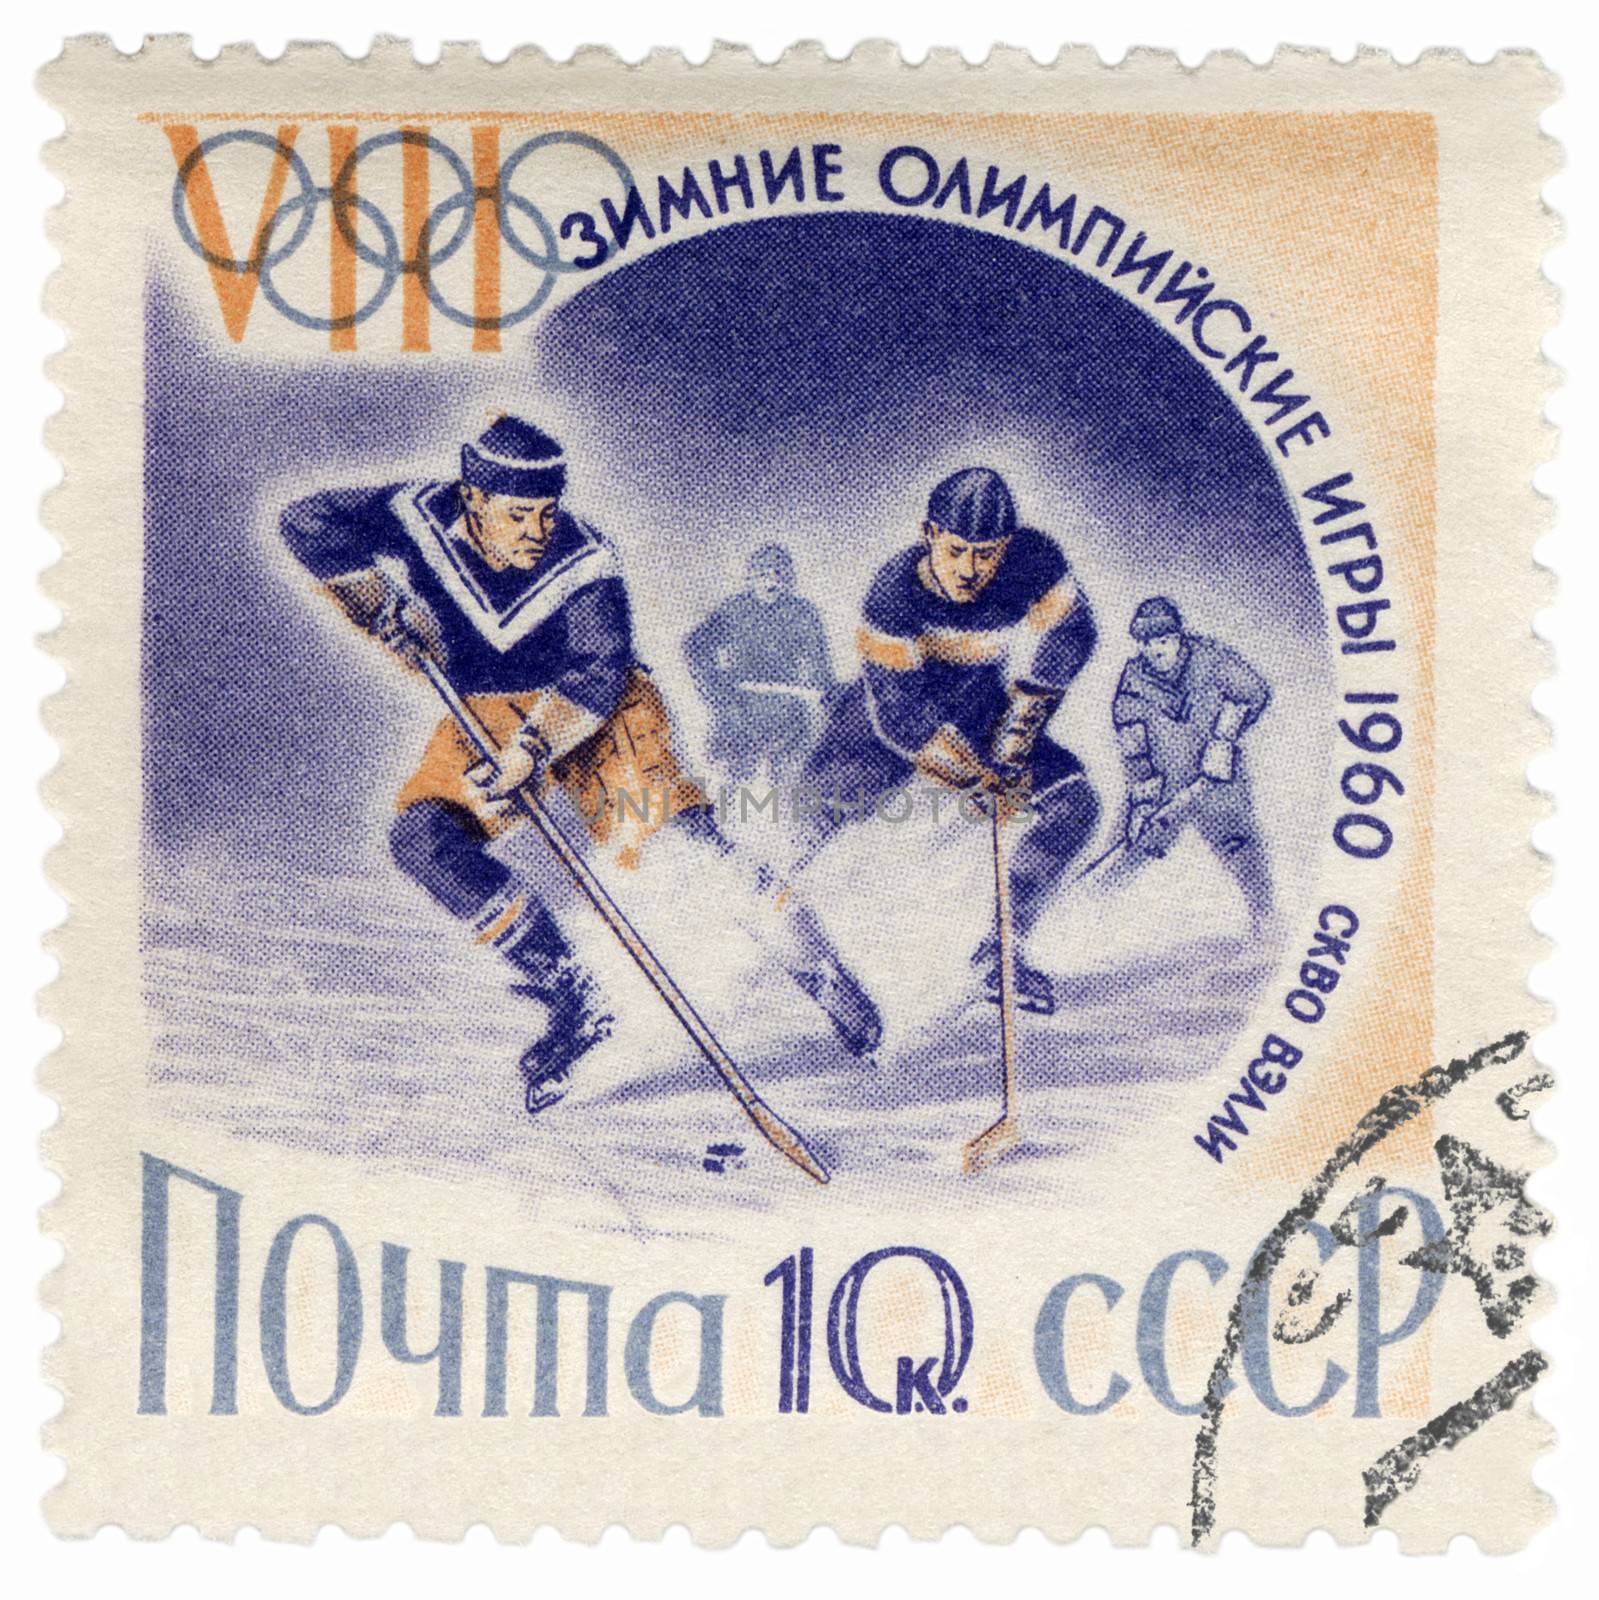 USSR - CIRCA 1960: A post stamp printed in the USSR shows ice hockey, dedicated to the Olympic Winter Games in Squaw Valley, series, circa 1960